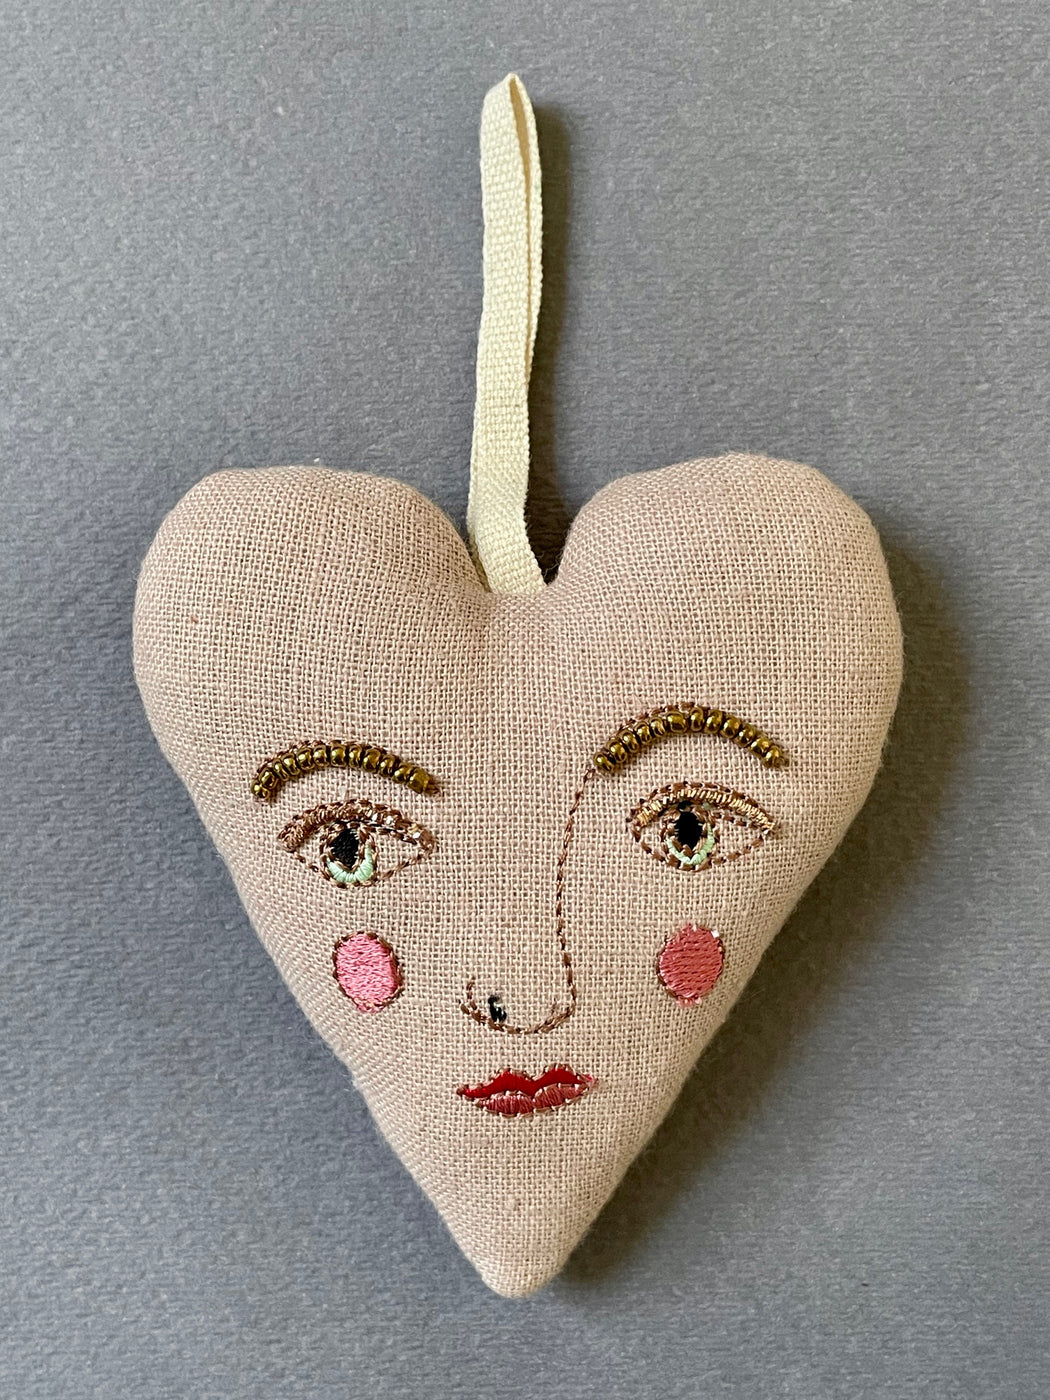 "Handsome Heart" Embroidered Lavender Sachet by Emma Mierop